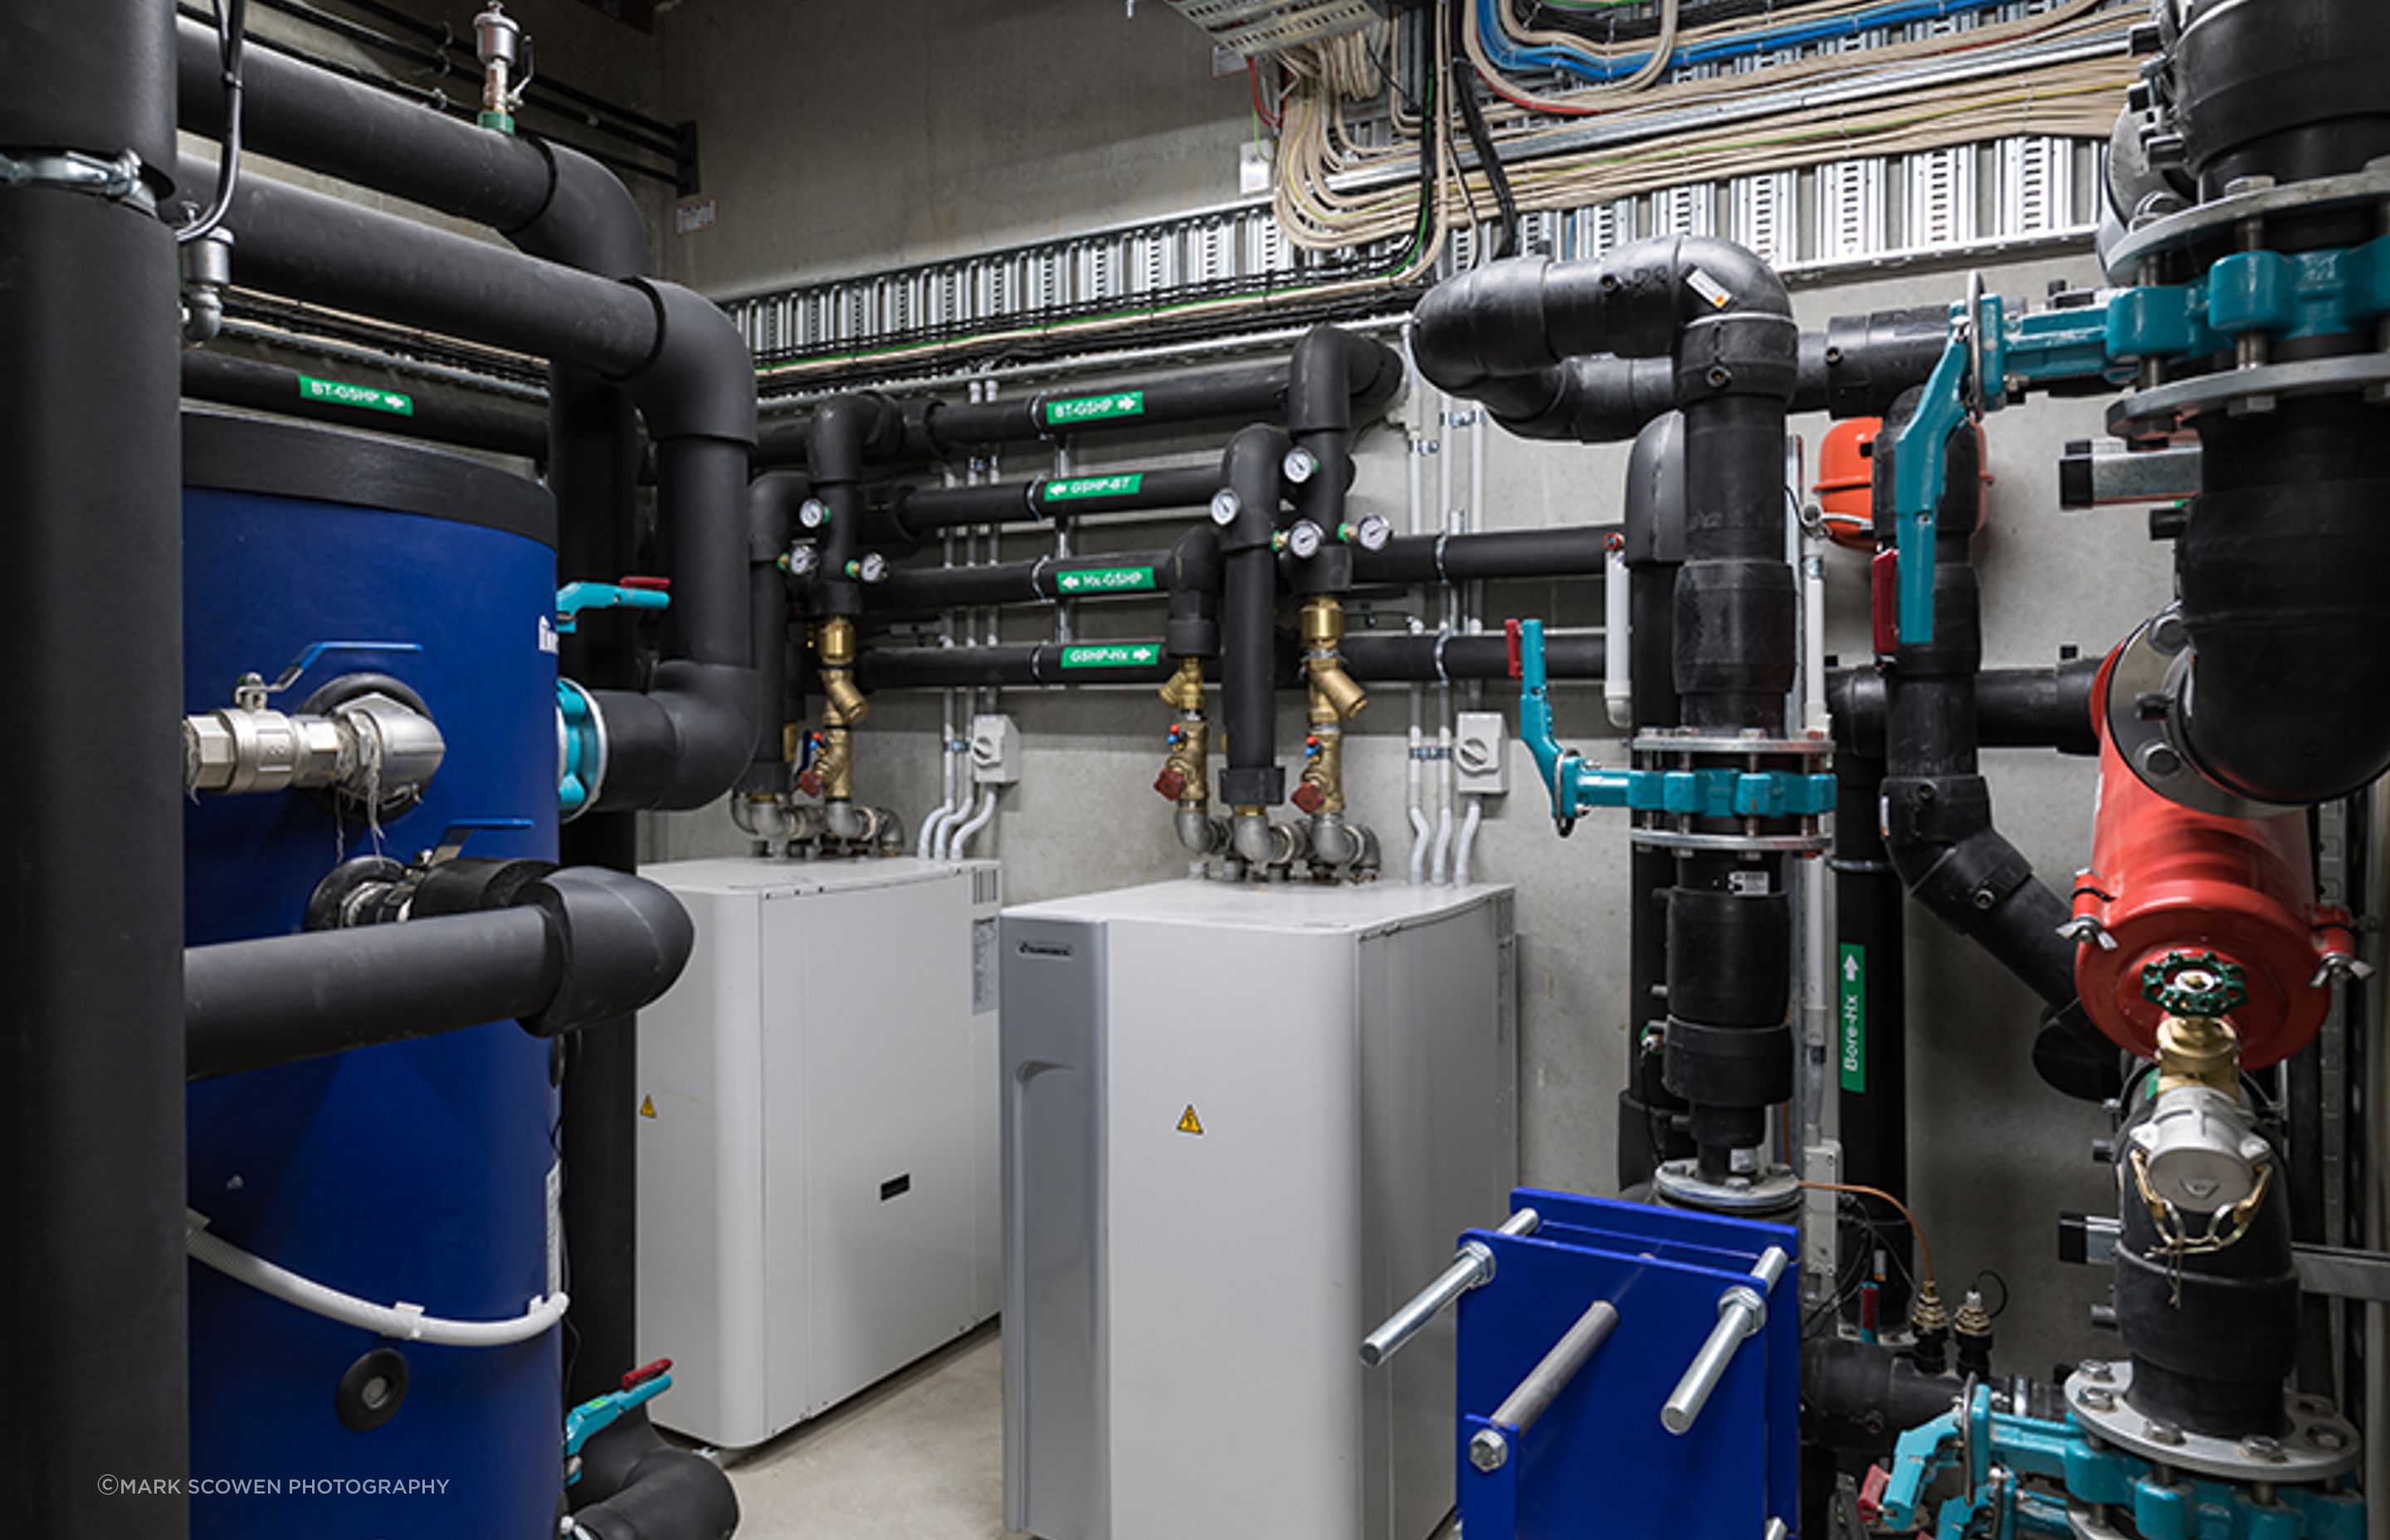 Cosgroves designed and installed a mechanical and hydraulic solution for Blum that includes a perimeter trench heating system fed via an open loop ground-source heat pump system, as well as a natural ventilation system controlled by an automated weather s